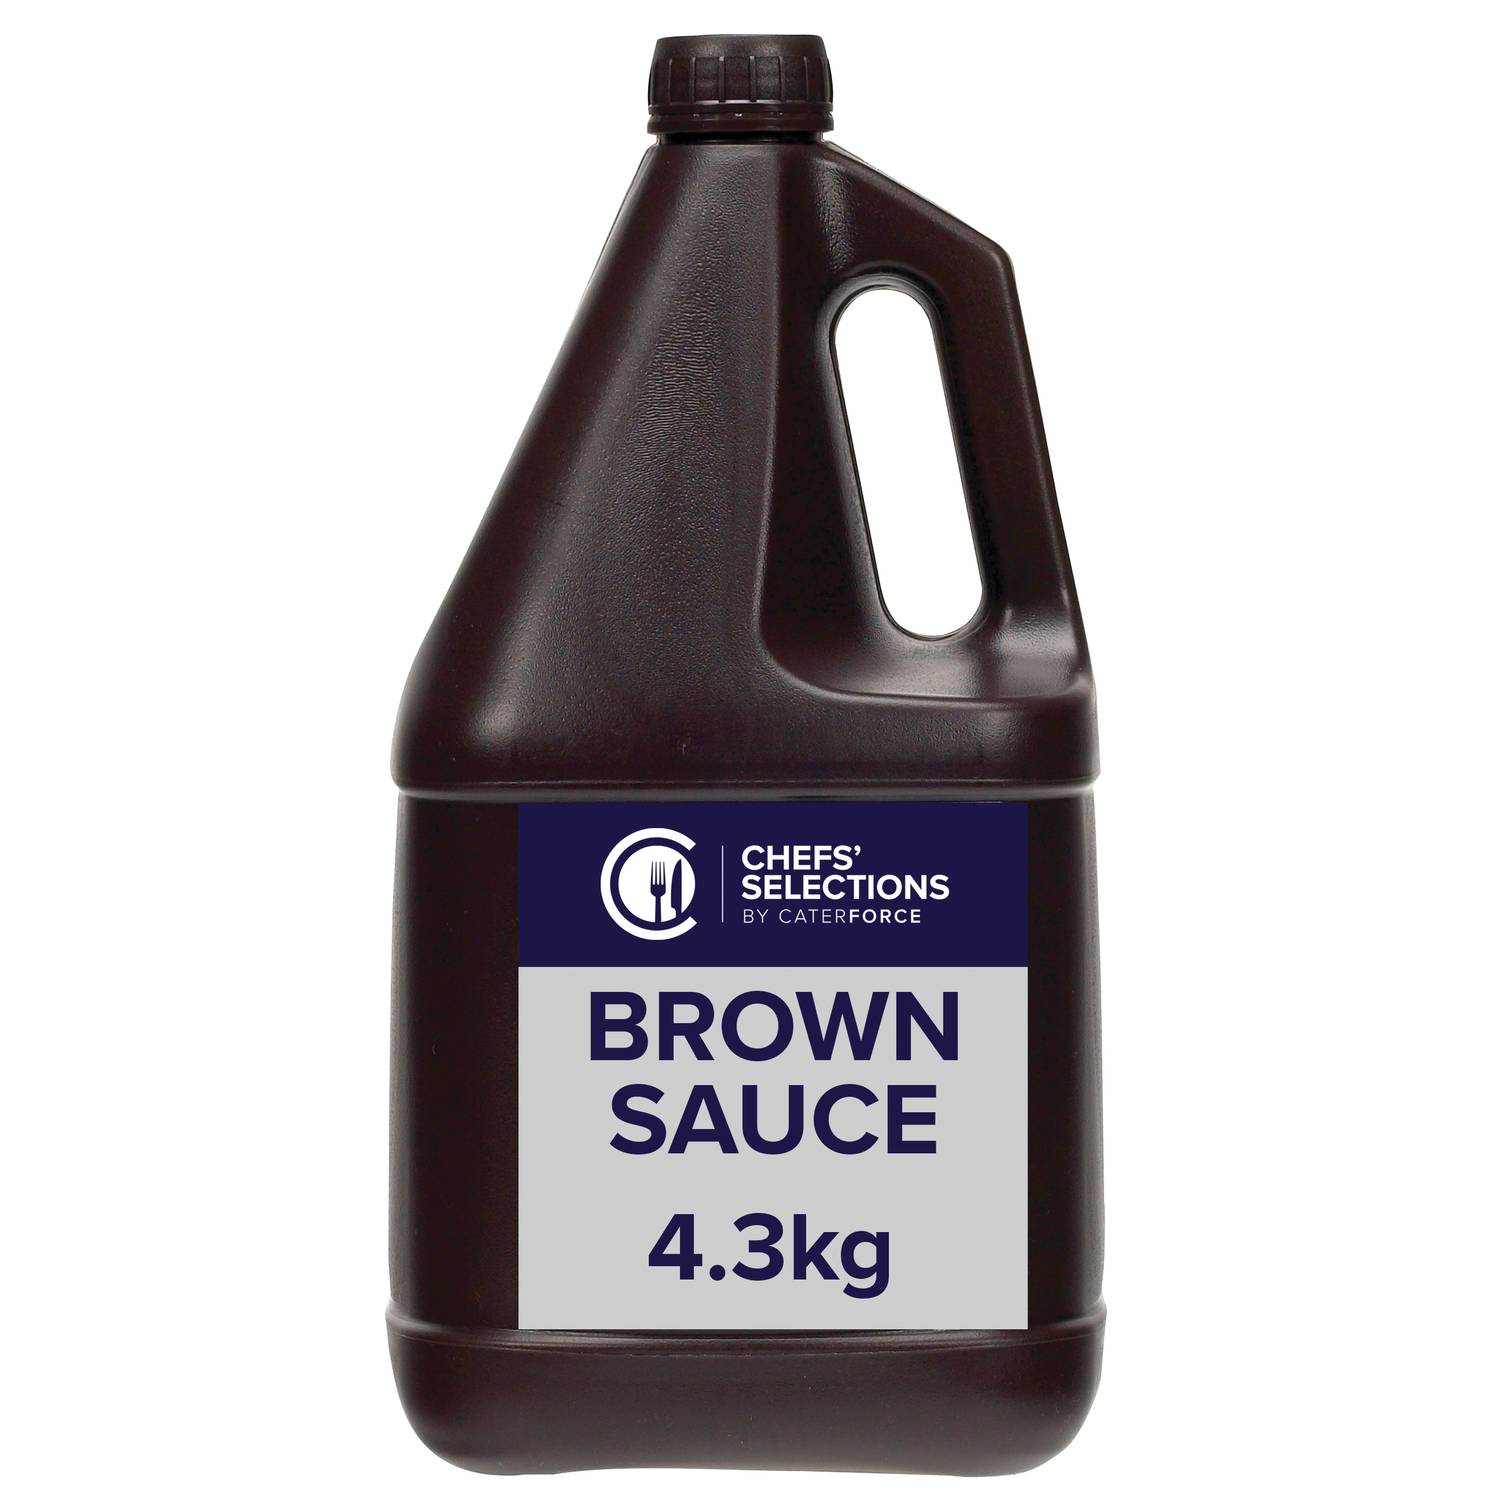 Chefs’ Selections Brown Sauce (2 x 4.3kg)